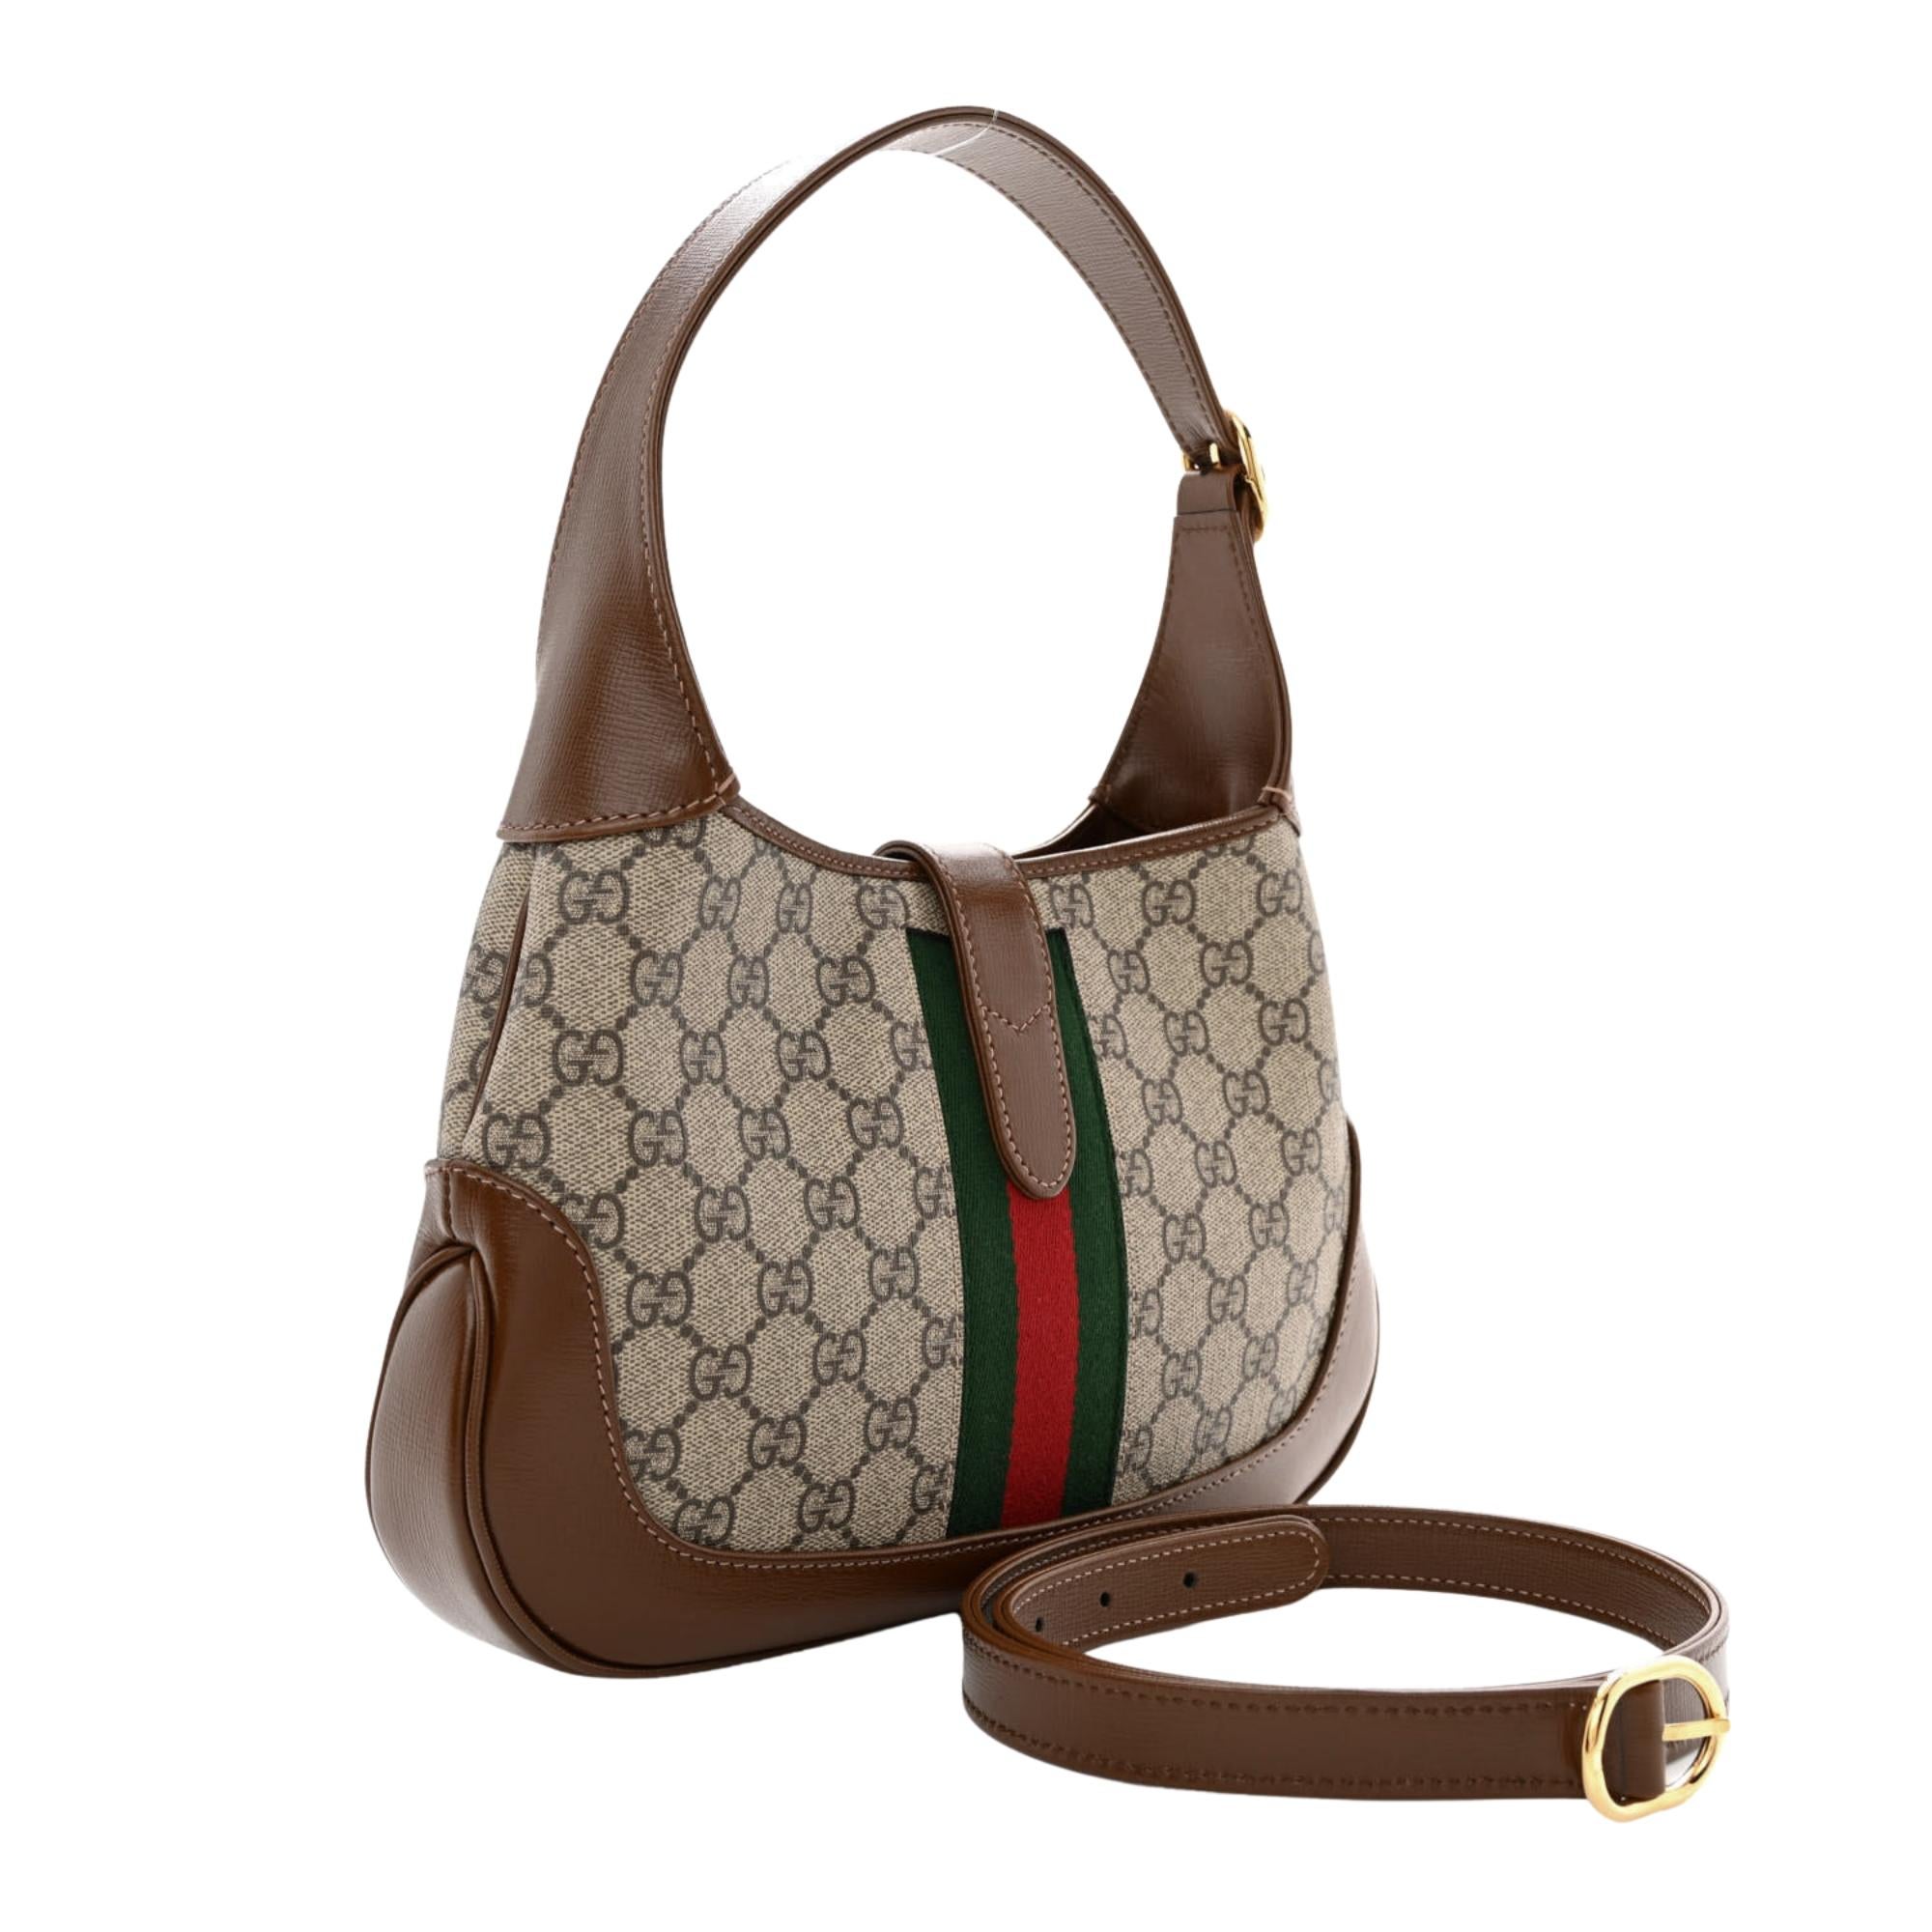 Color: Ebony GG monogram print
Material: GG Supreme canvas with leather finishes
Model No.: 636706 
Measures: Height 7” x Length 11” x Depth 1.5”
Drop: 19 inches with the attached shoulder strap & 7 inches without the strap.
Comes with: Dust bag and